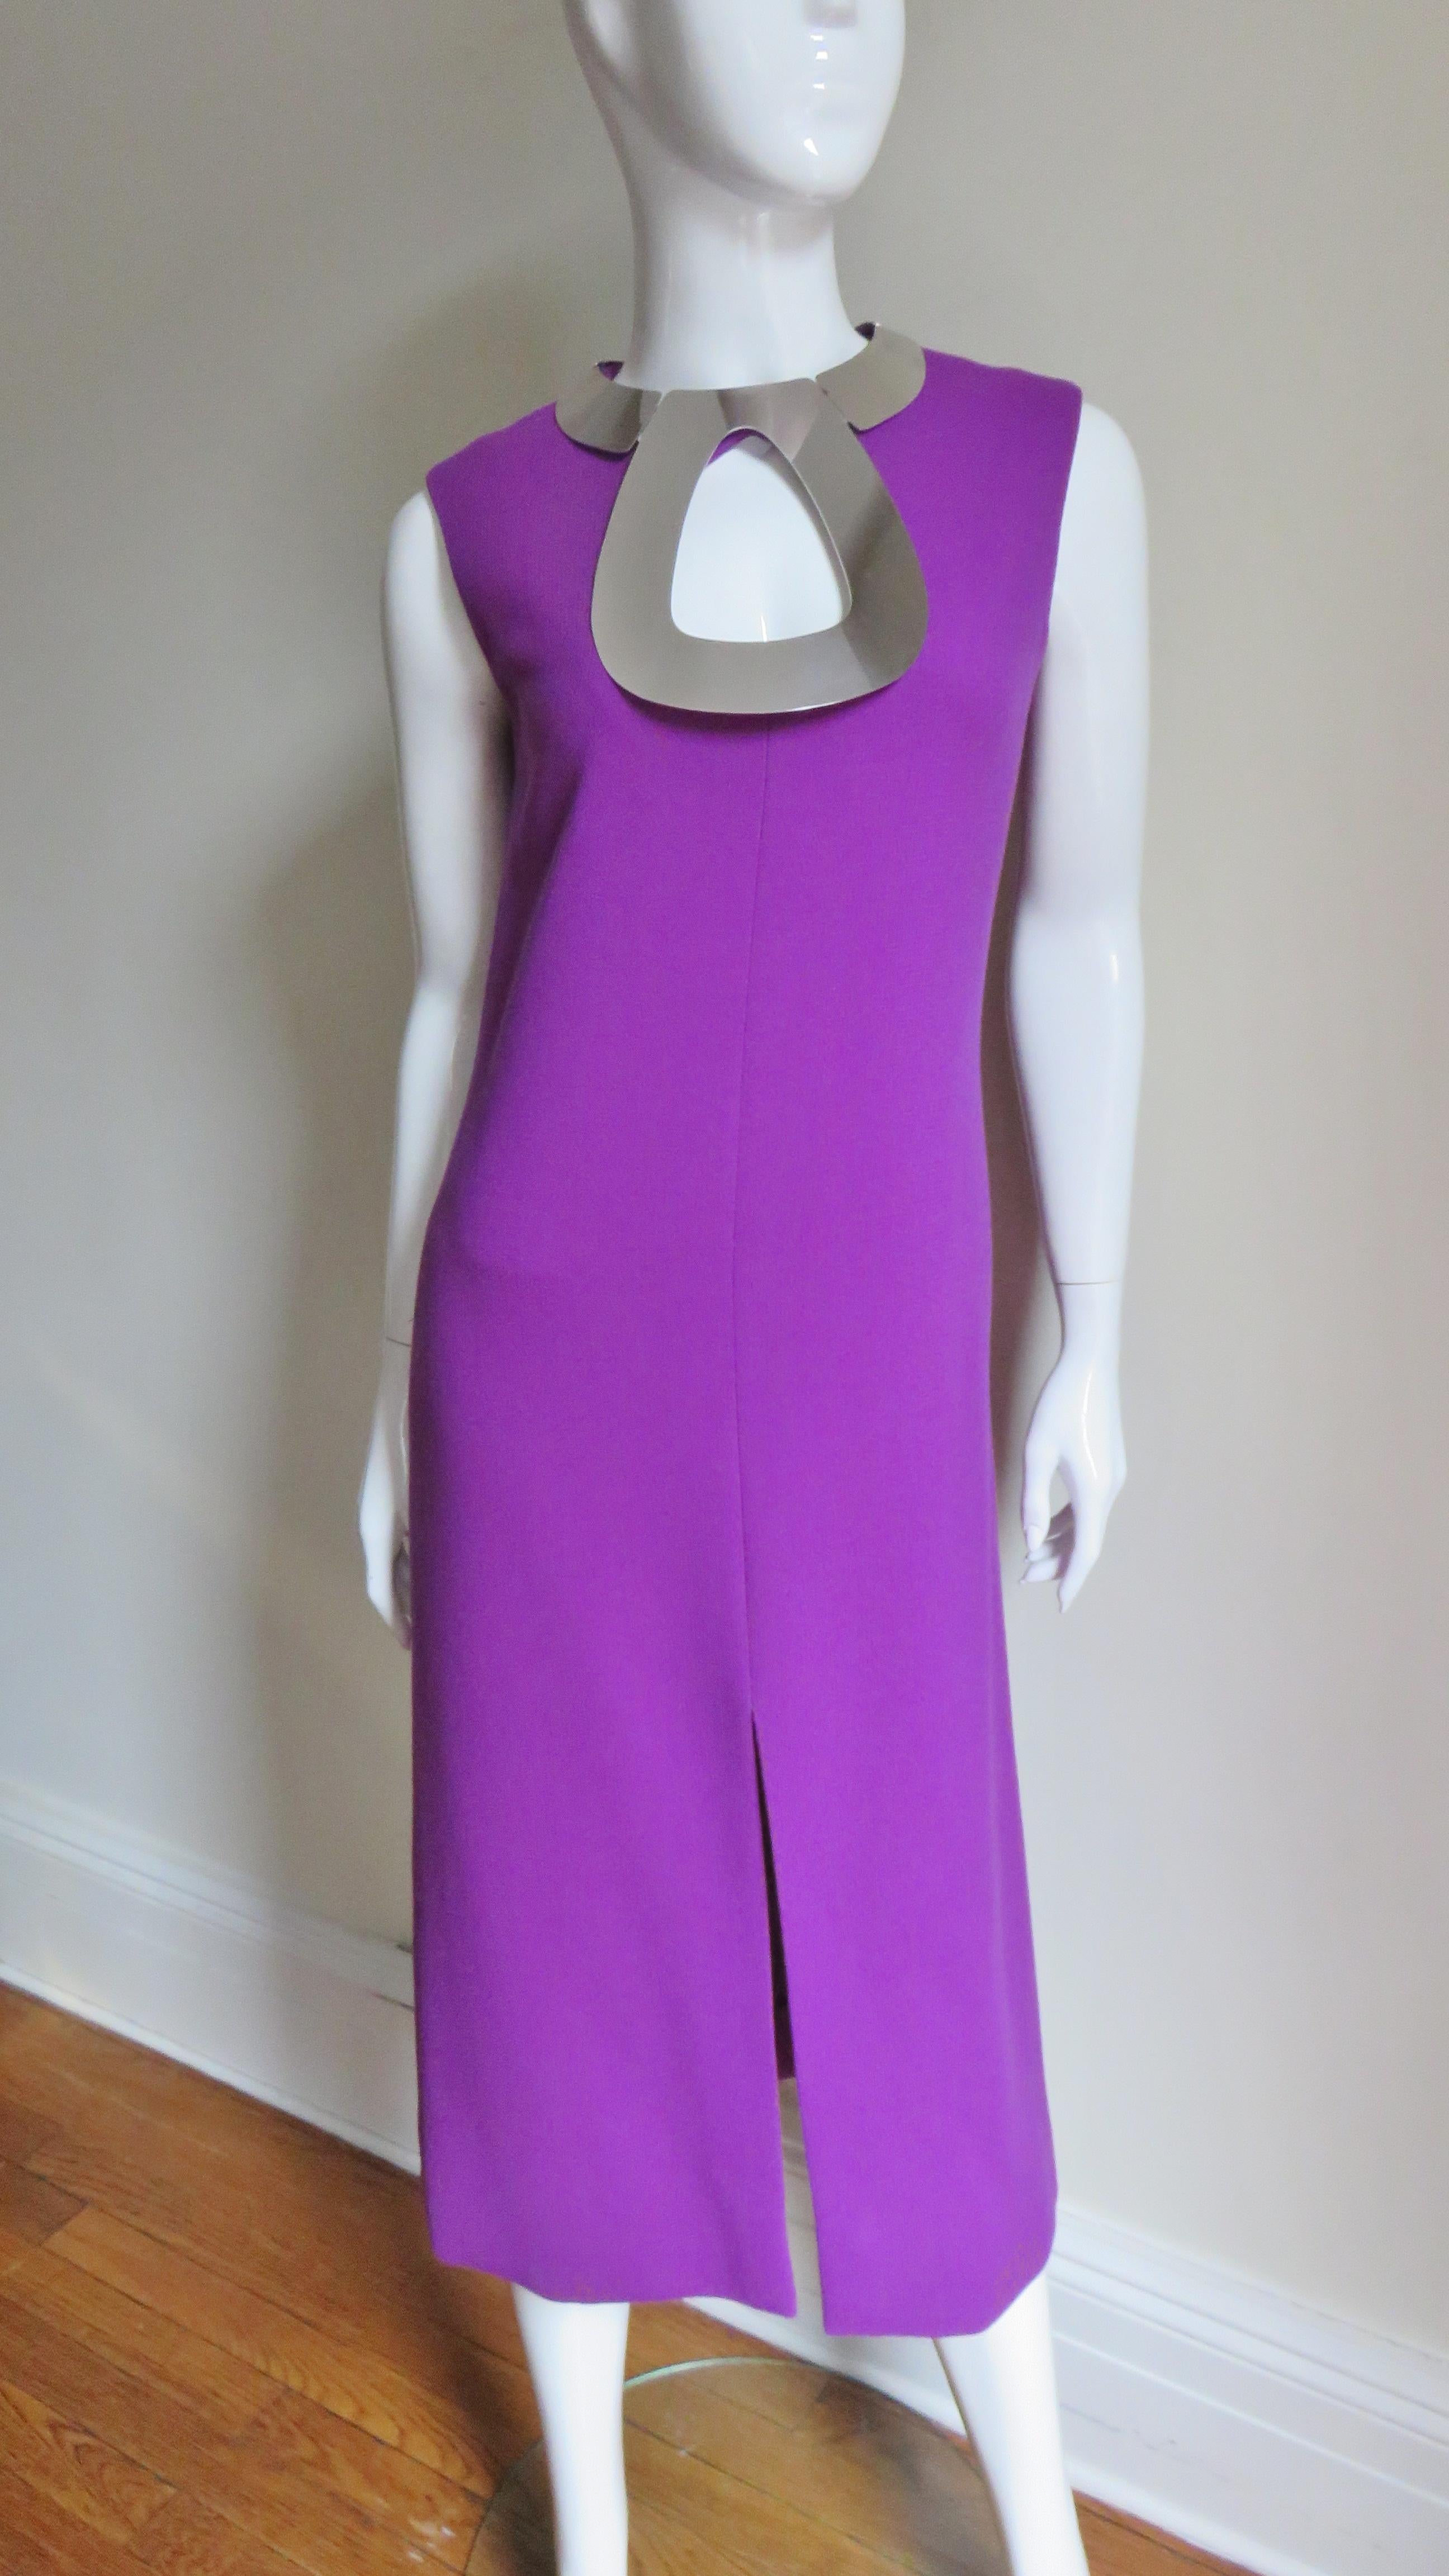  Pierre Cardin 1960s Iconic Metal Hardware Collar Dress For Sale 3